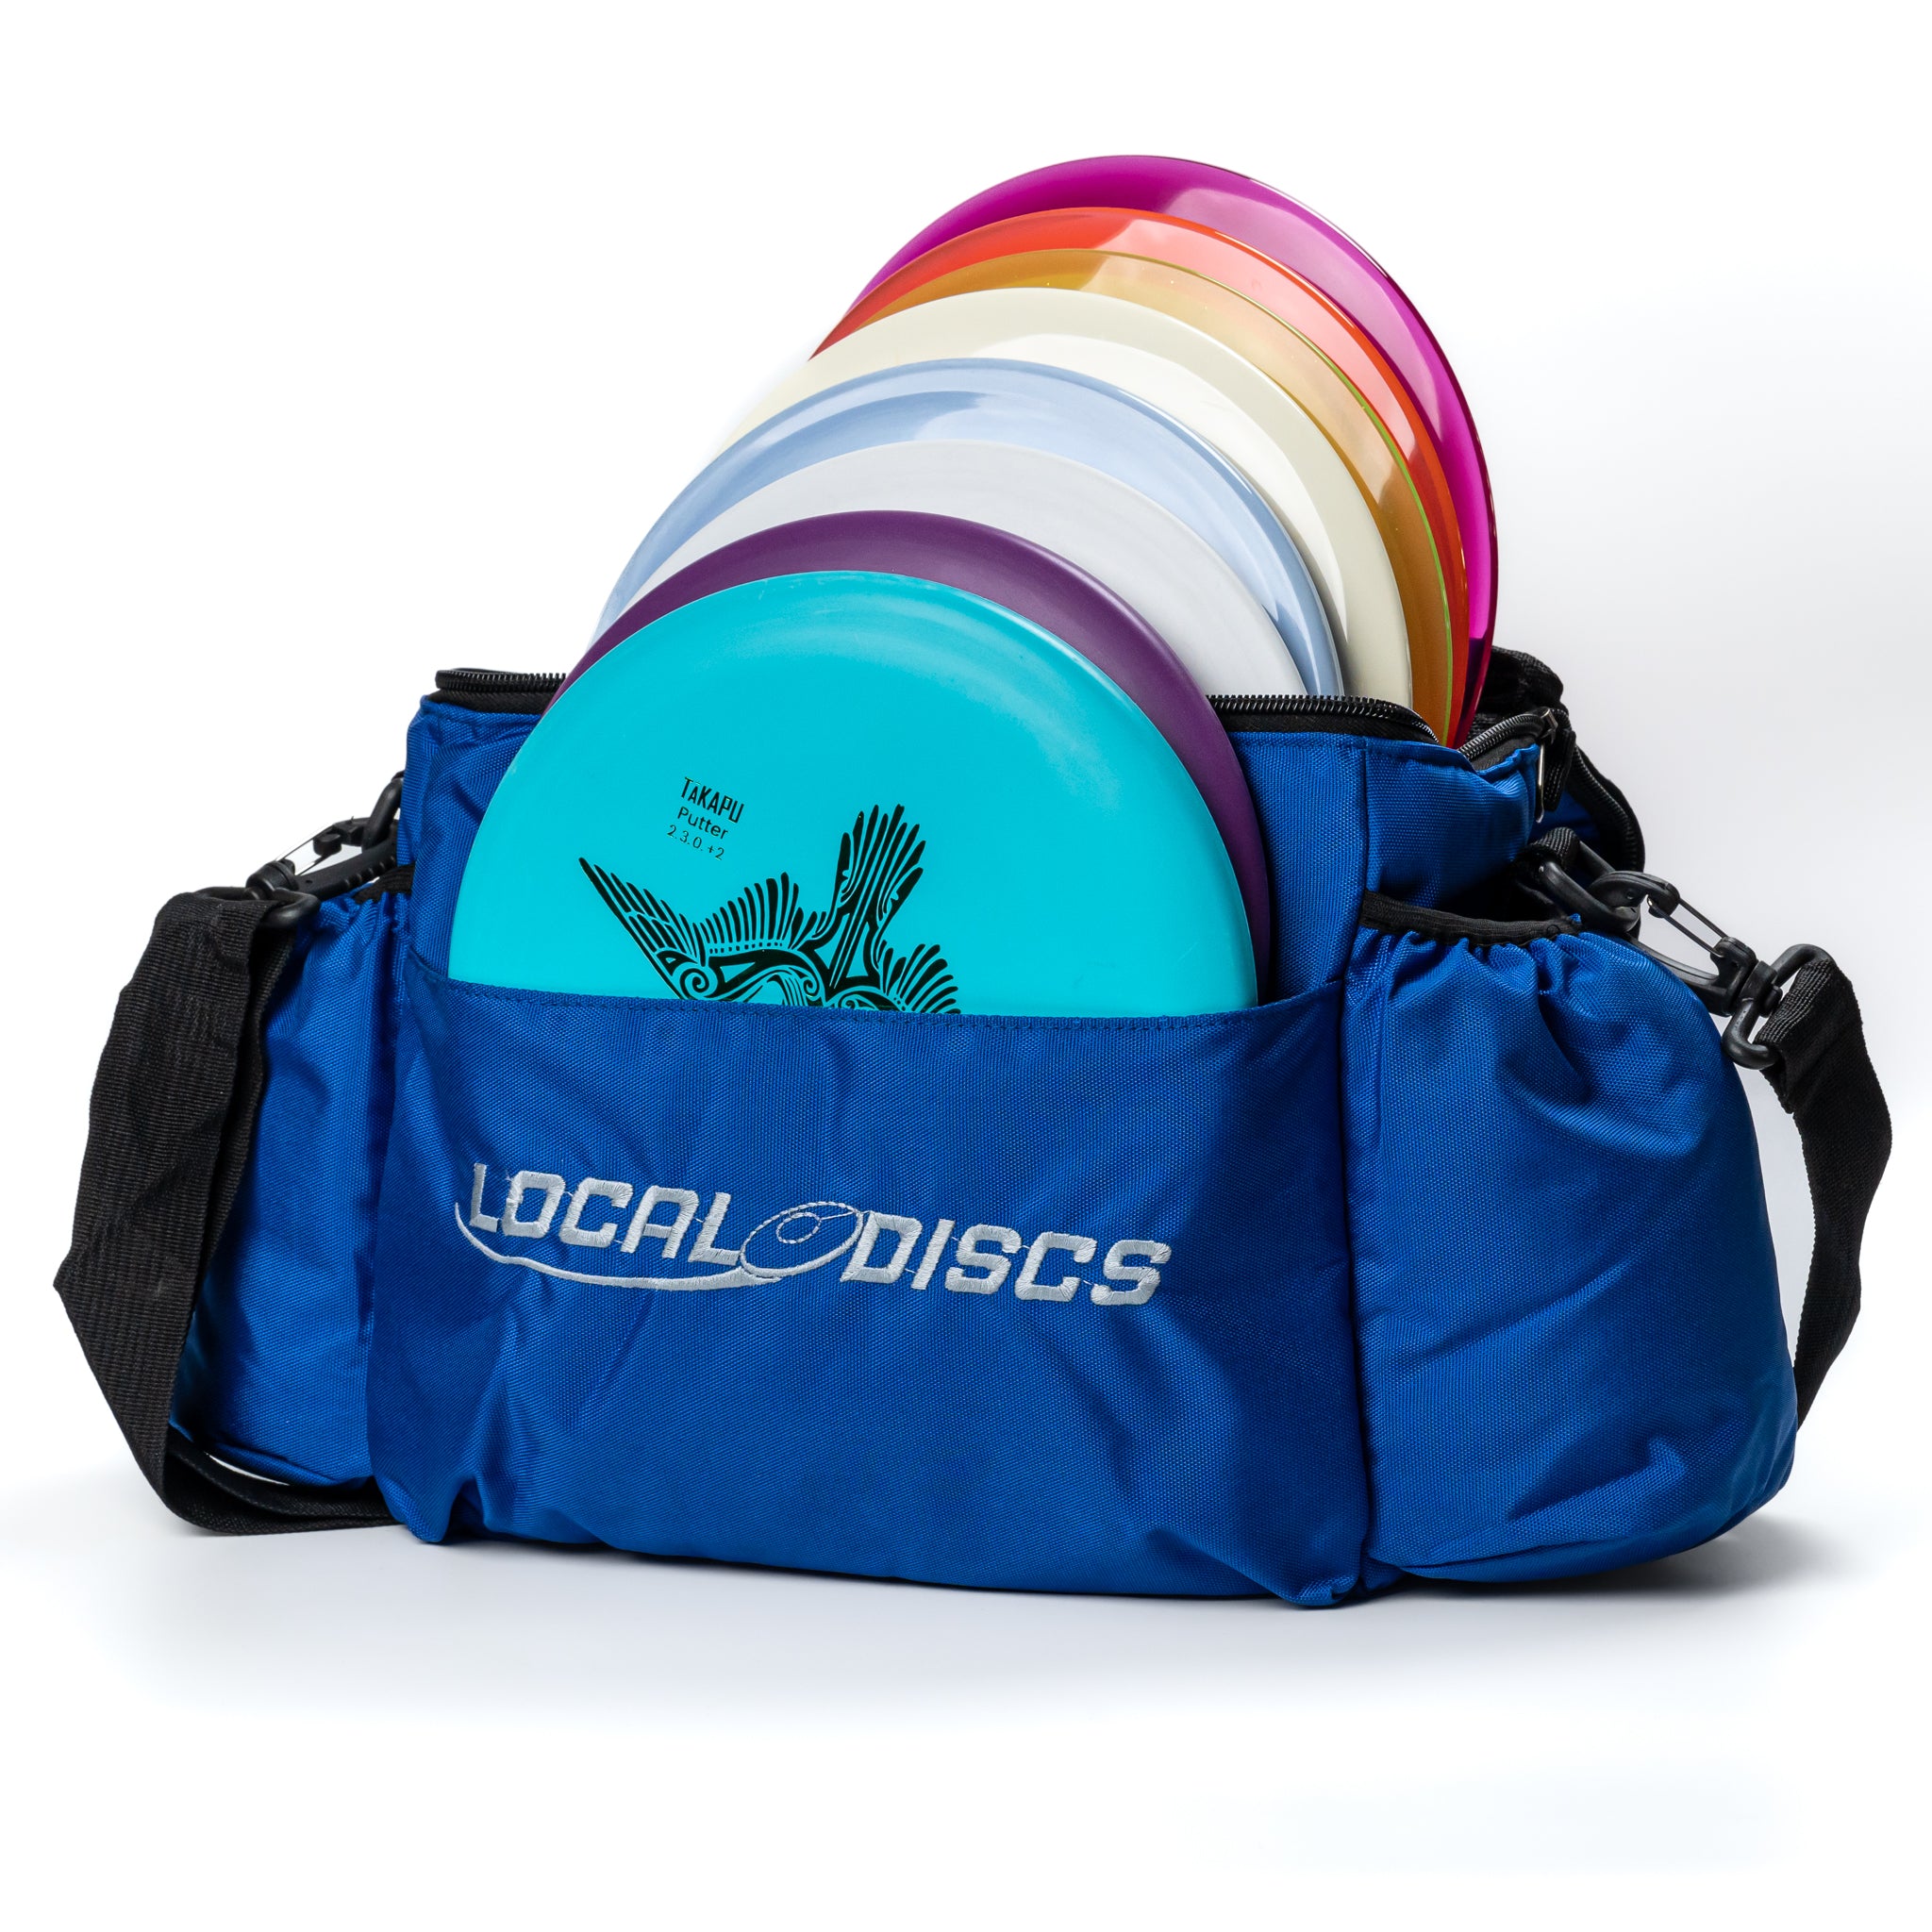 Local Discs Pro Deluxe Disc Golf Set with blue bag and Takapu putter